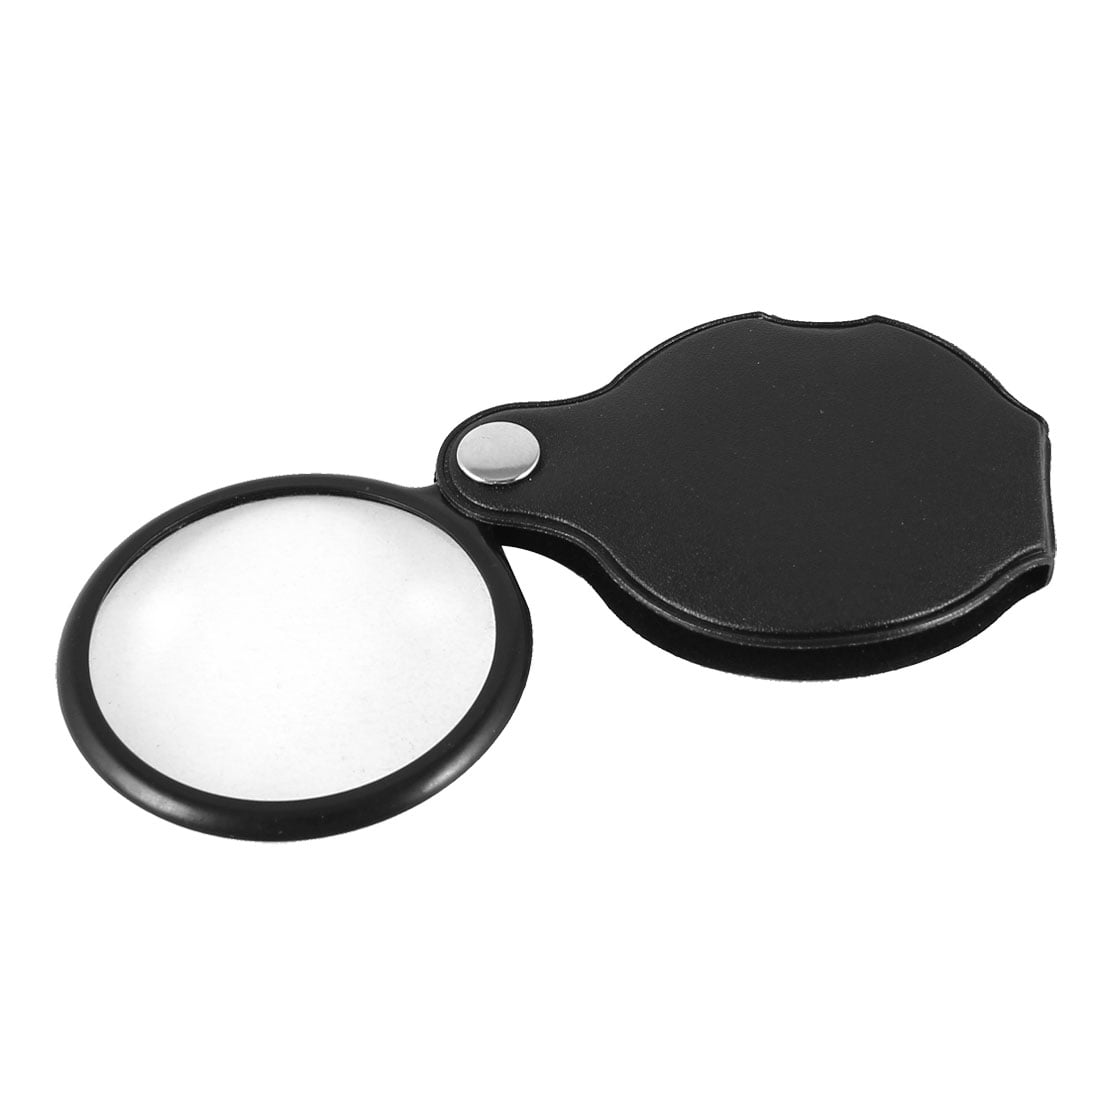 LU25 foldaway pocket magnifier with 3x magnification and black leather  protective case